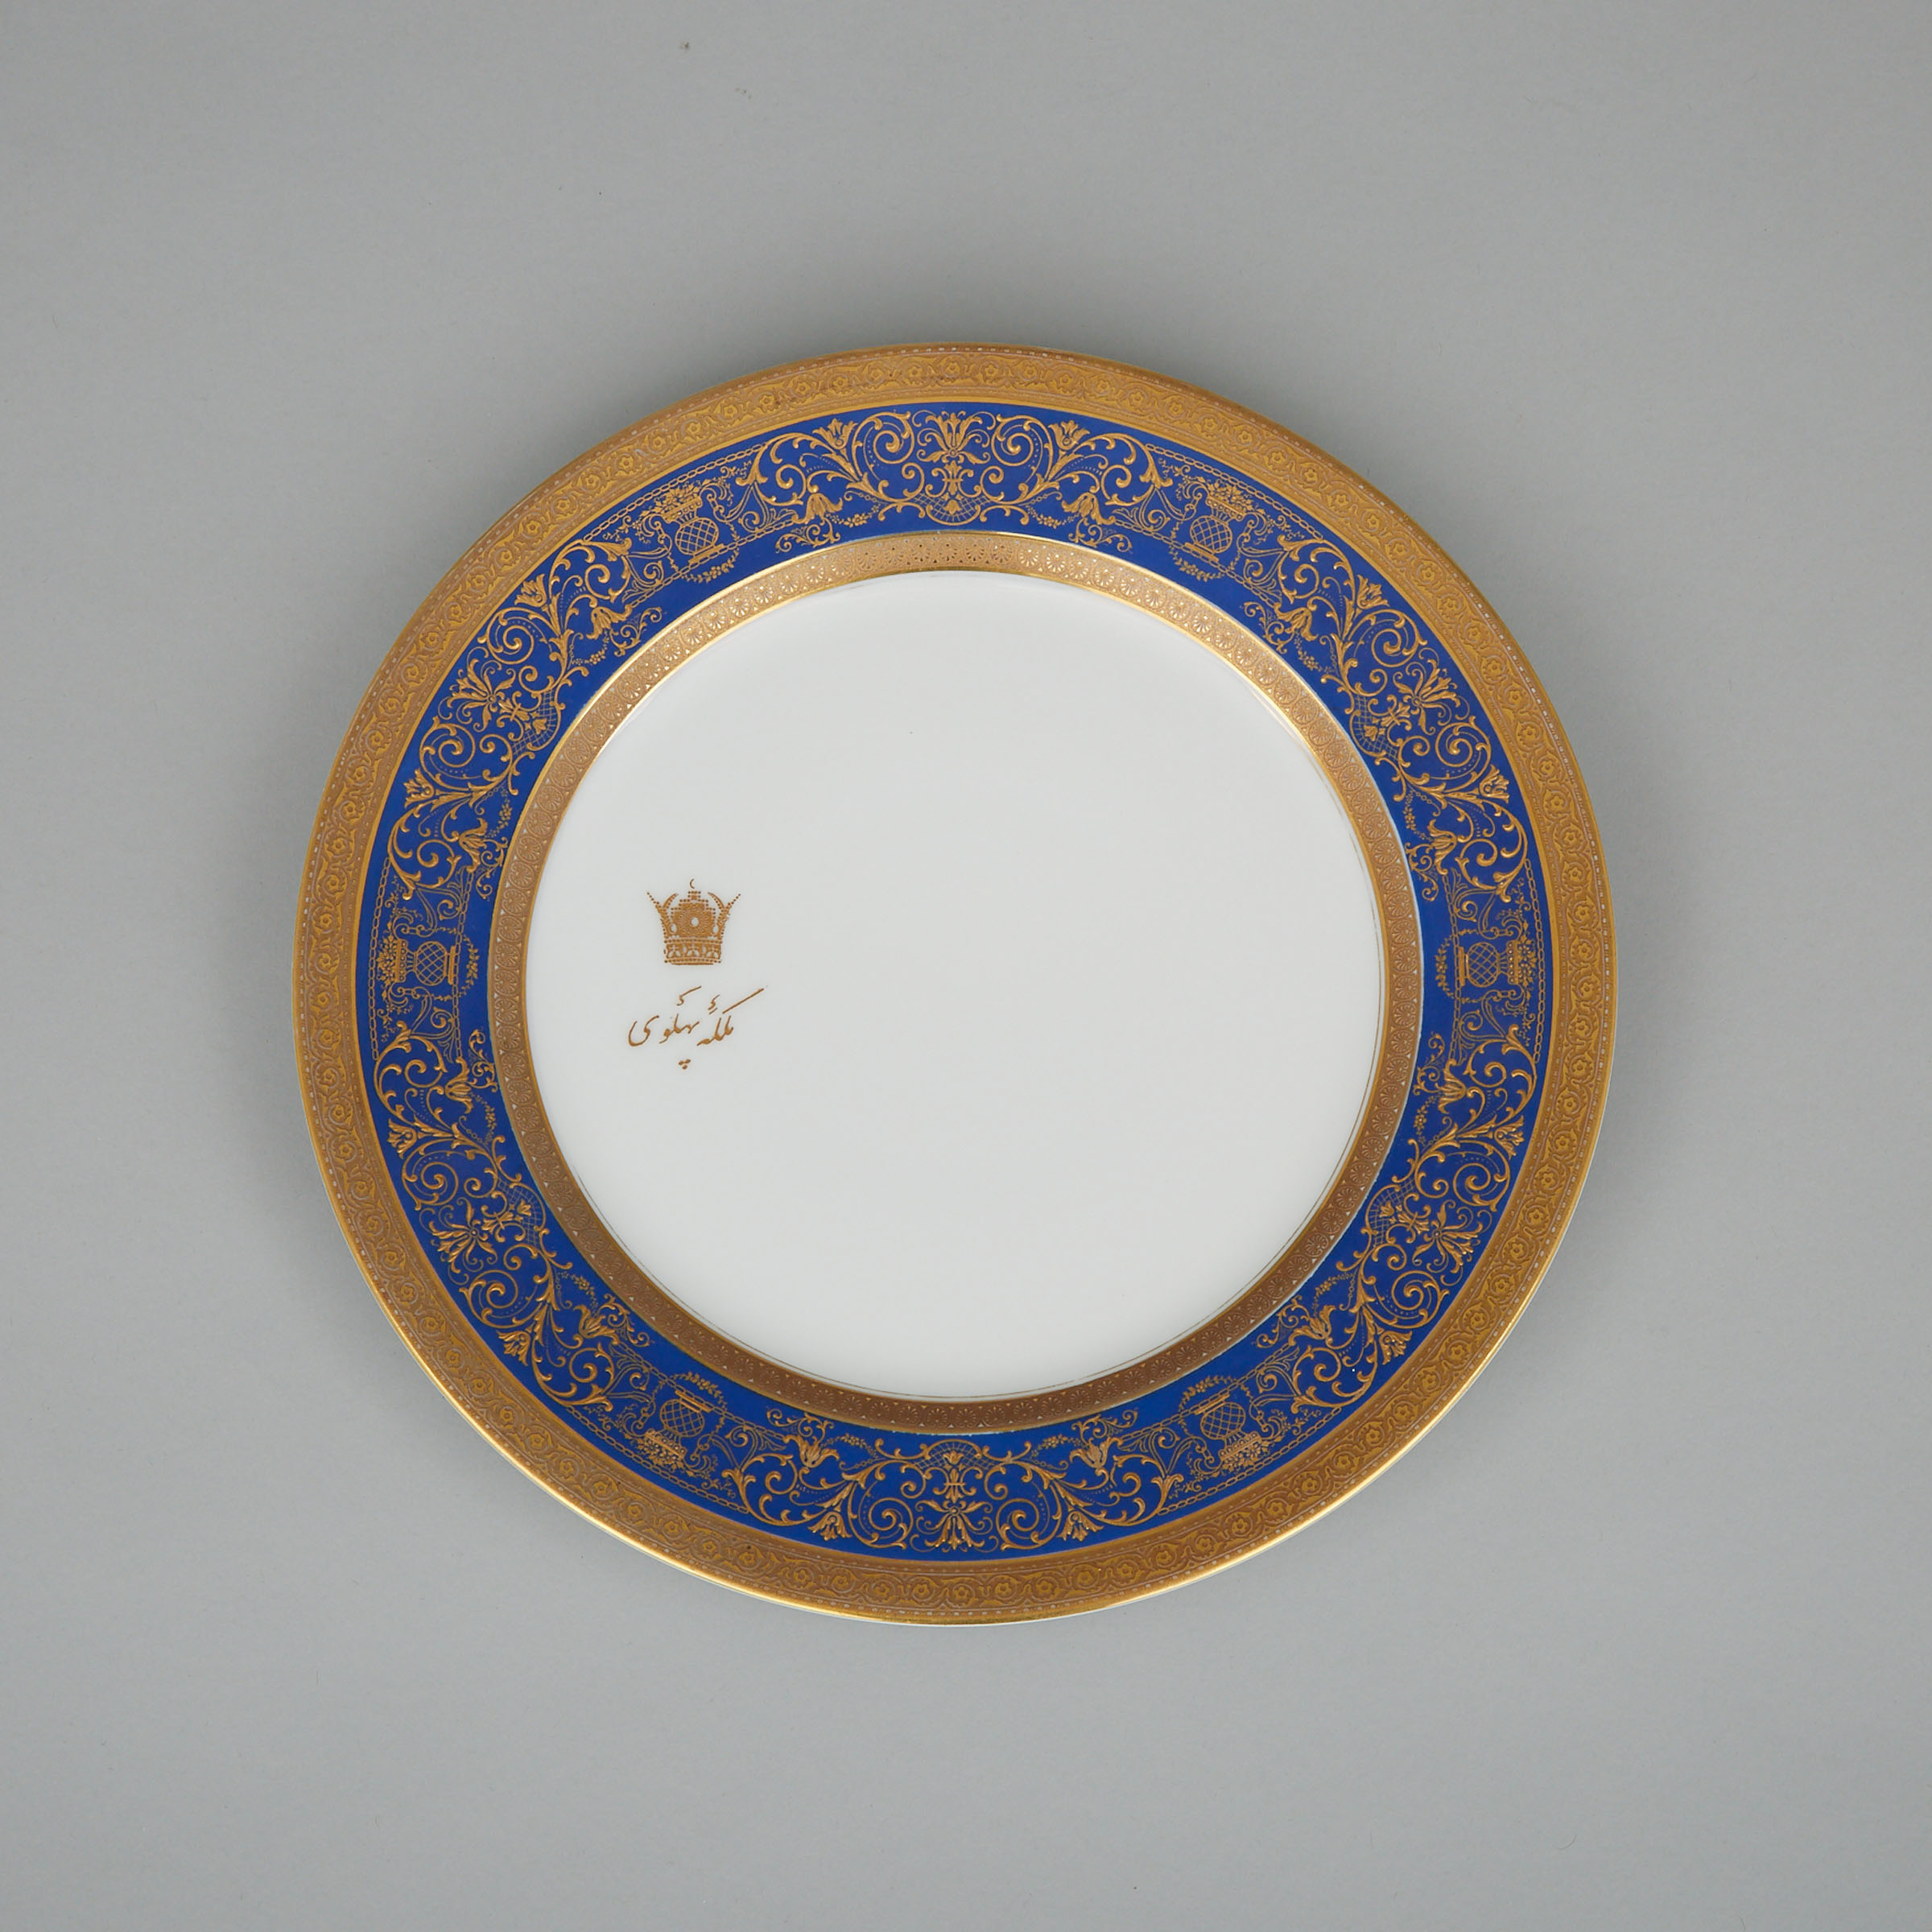 Rosenthal Armorial Service Plate for the Shah of Iran, Mohammad Reza Pahlavi, mid-20th century